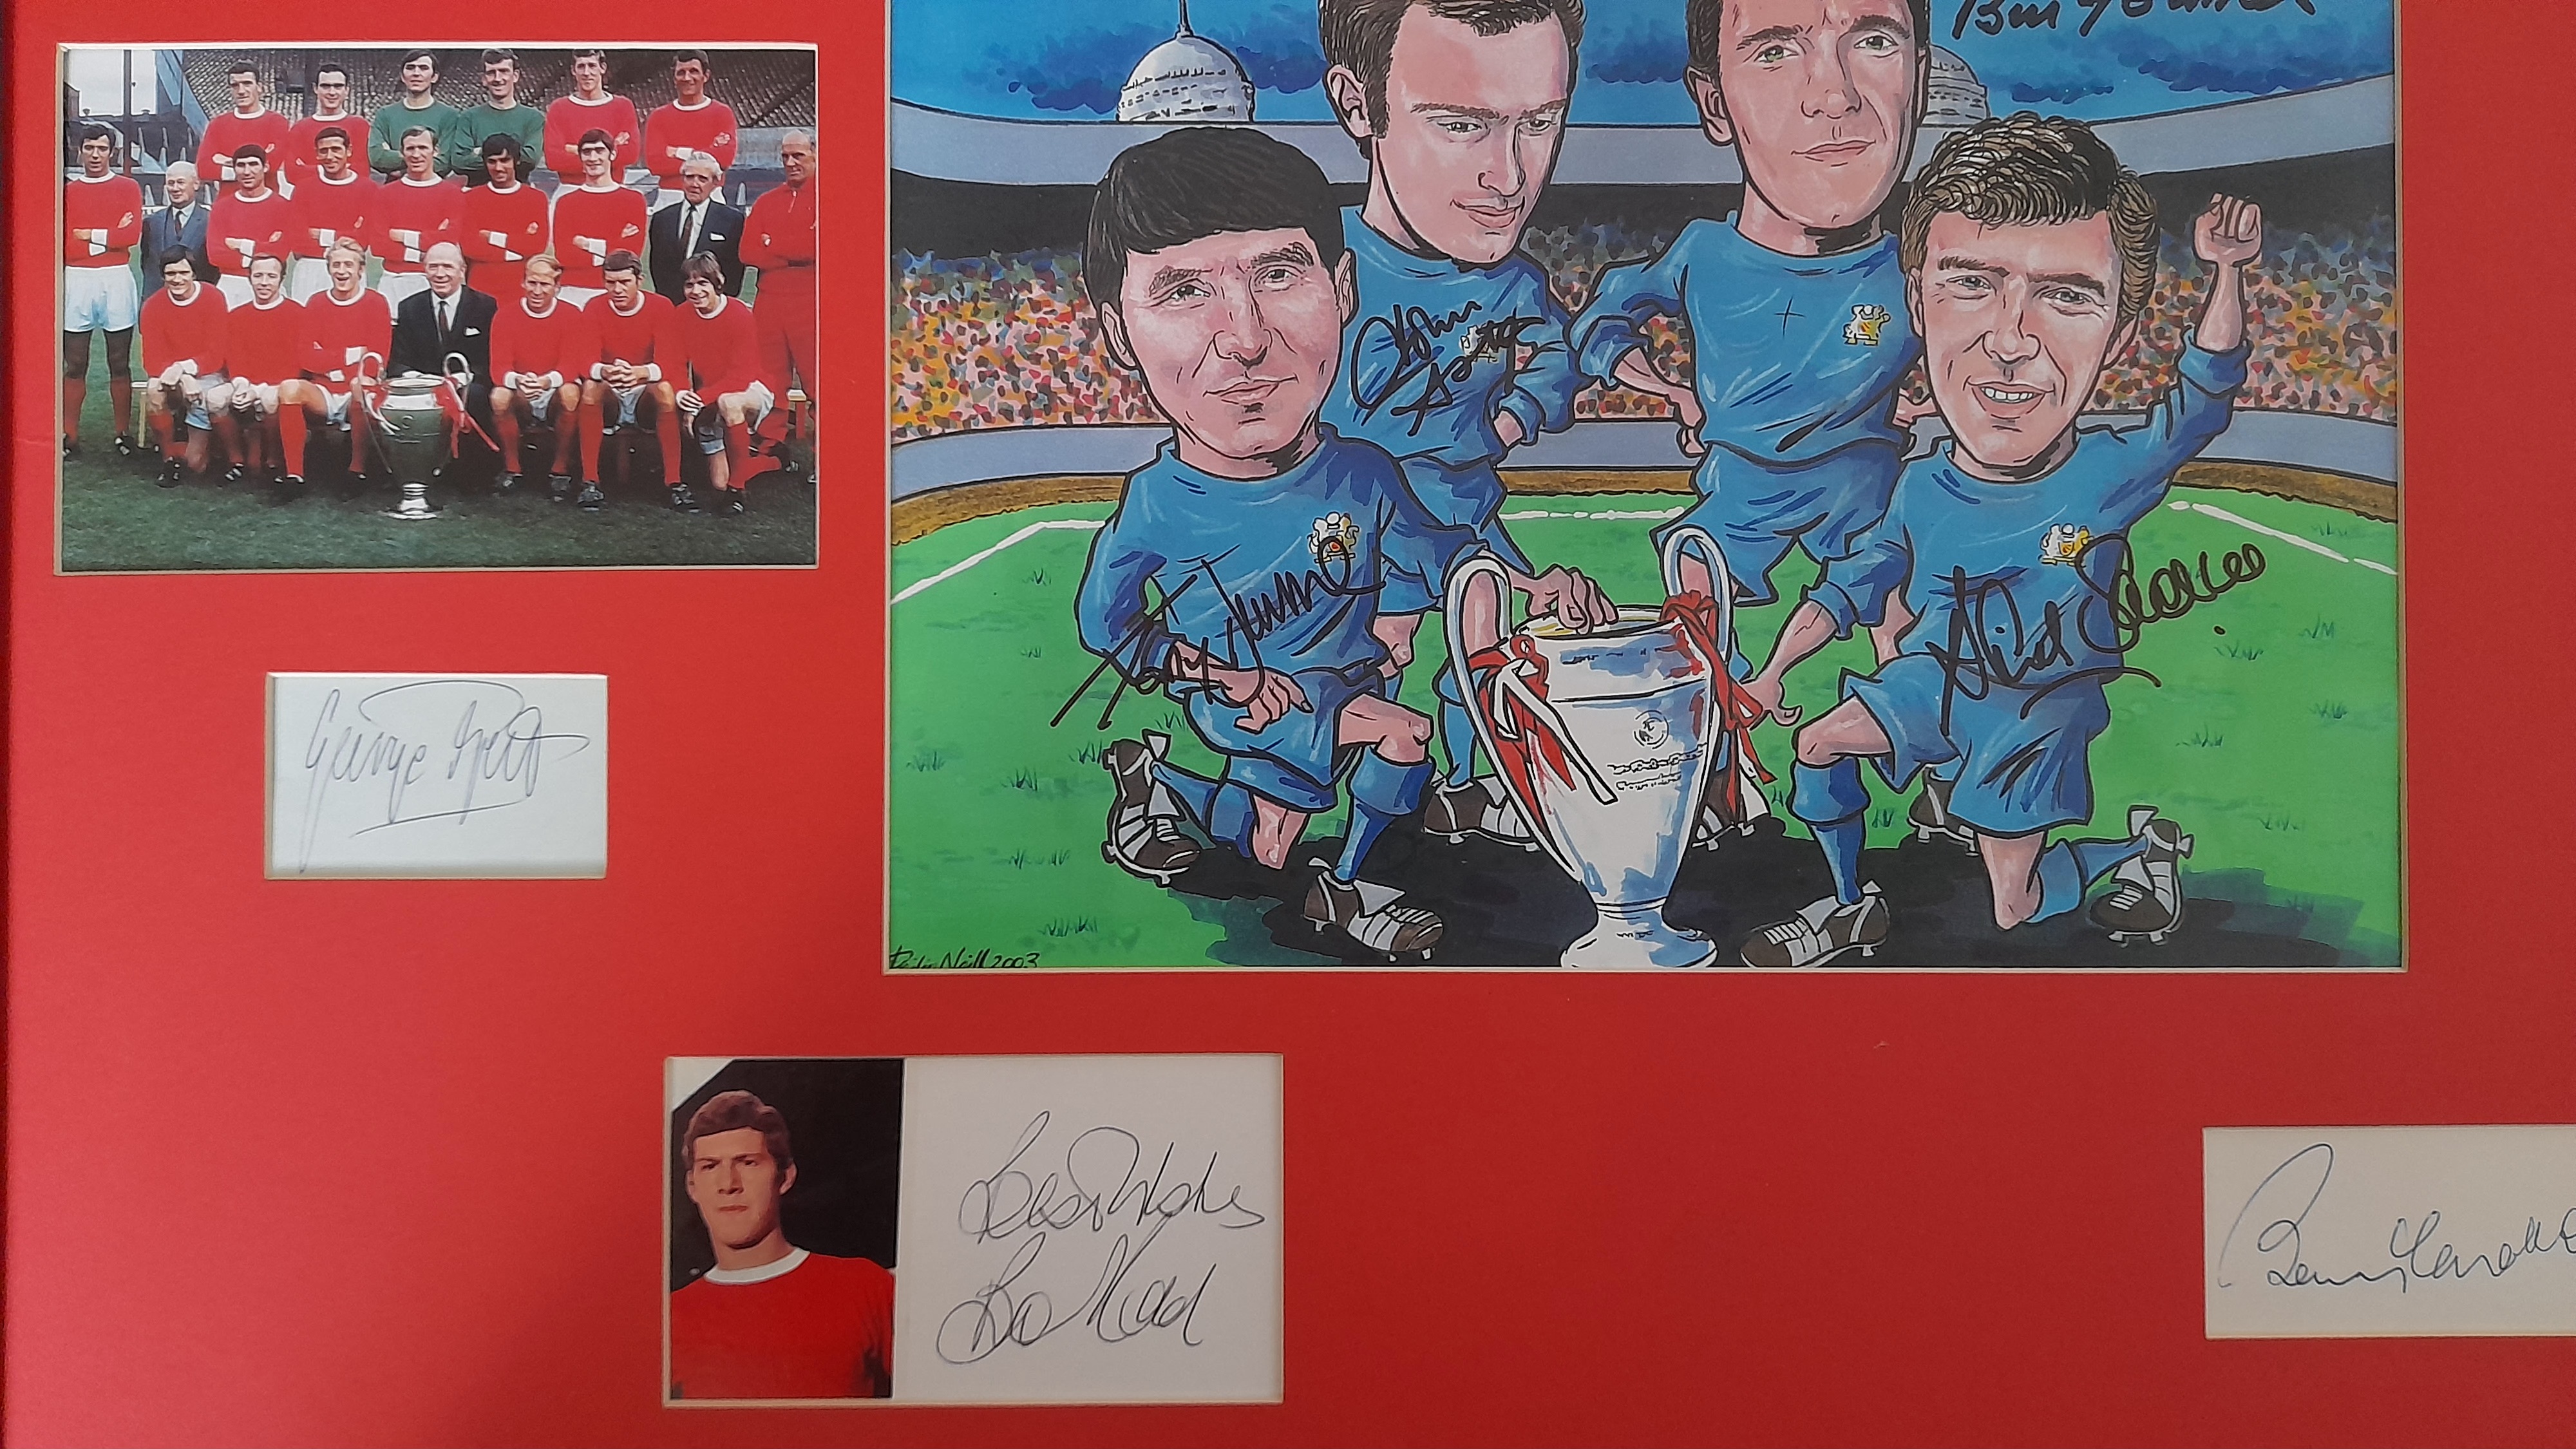 MANCHESTER UNITED 1968 EUROPEAN CUP WINNERS AUTOGRAPHED DISPLAY - Image 3 of 6